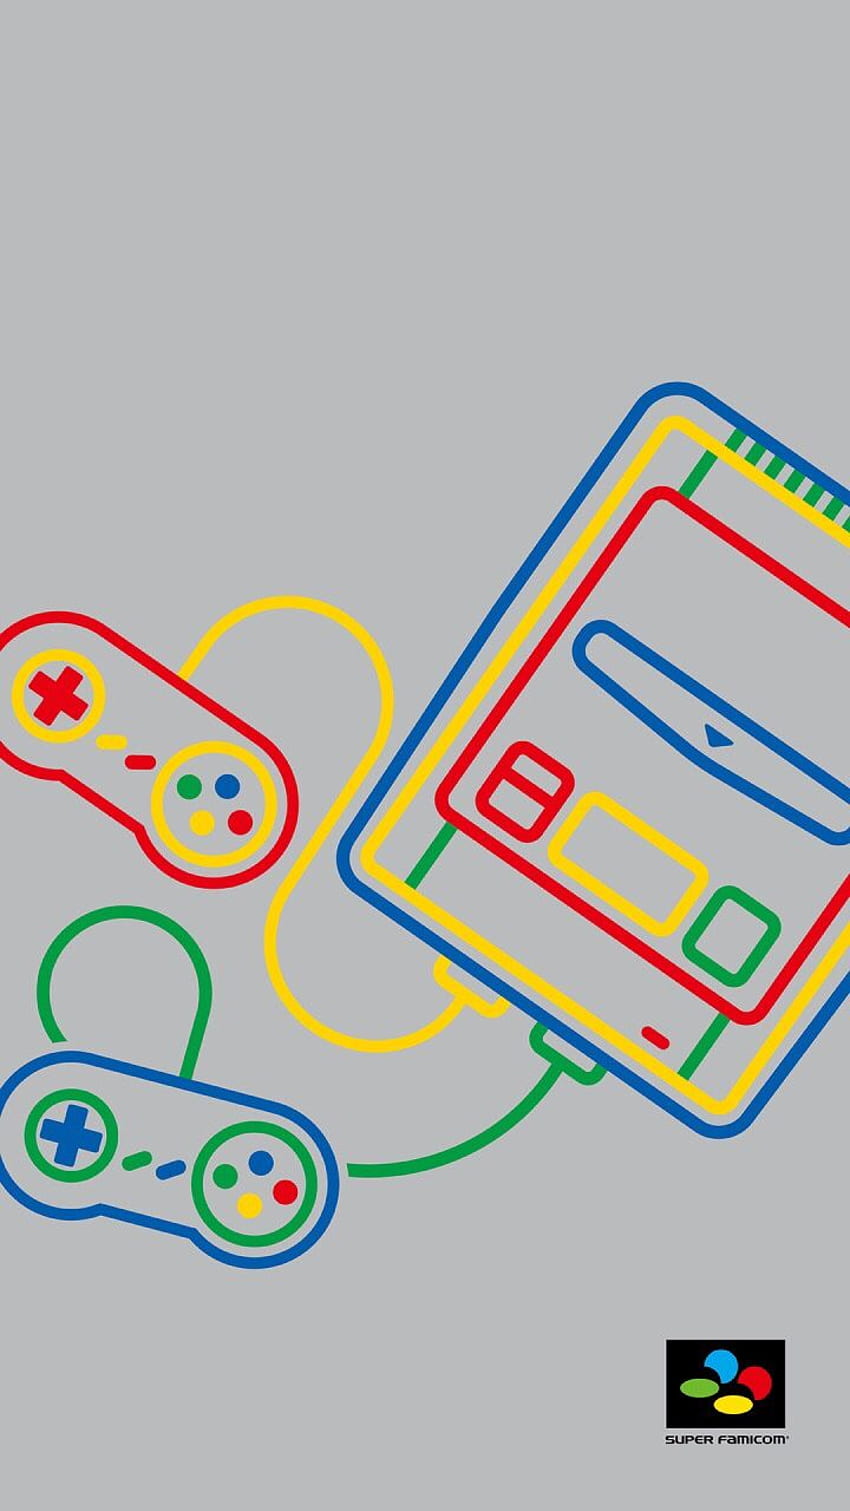 Nintendo LINE account - a look at the latest Super Famicom stickers HD phone wallpaper